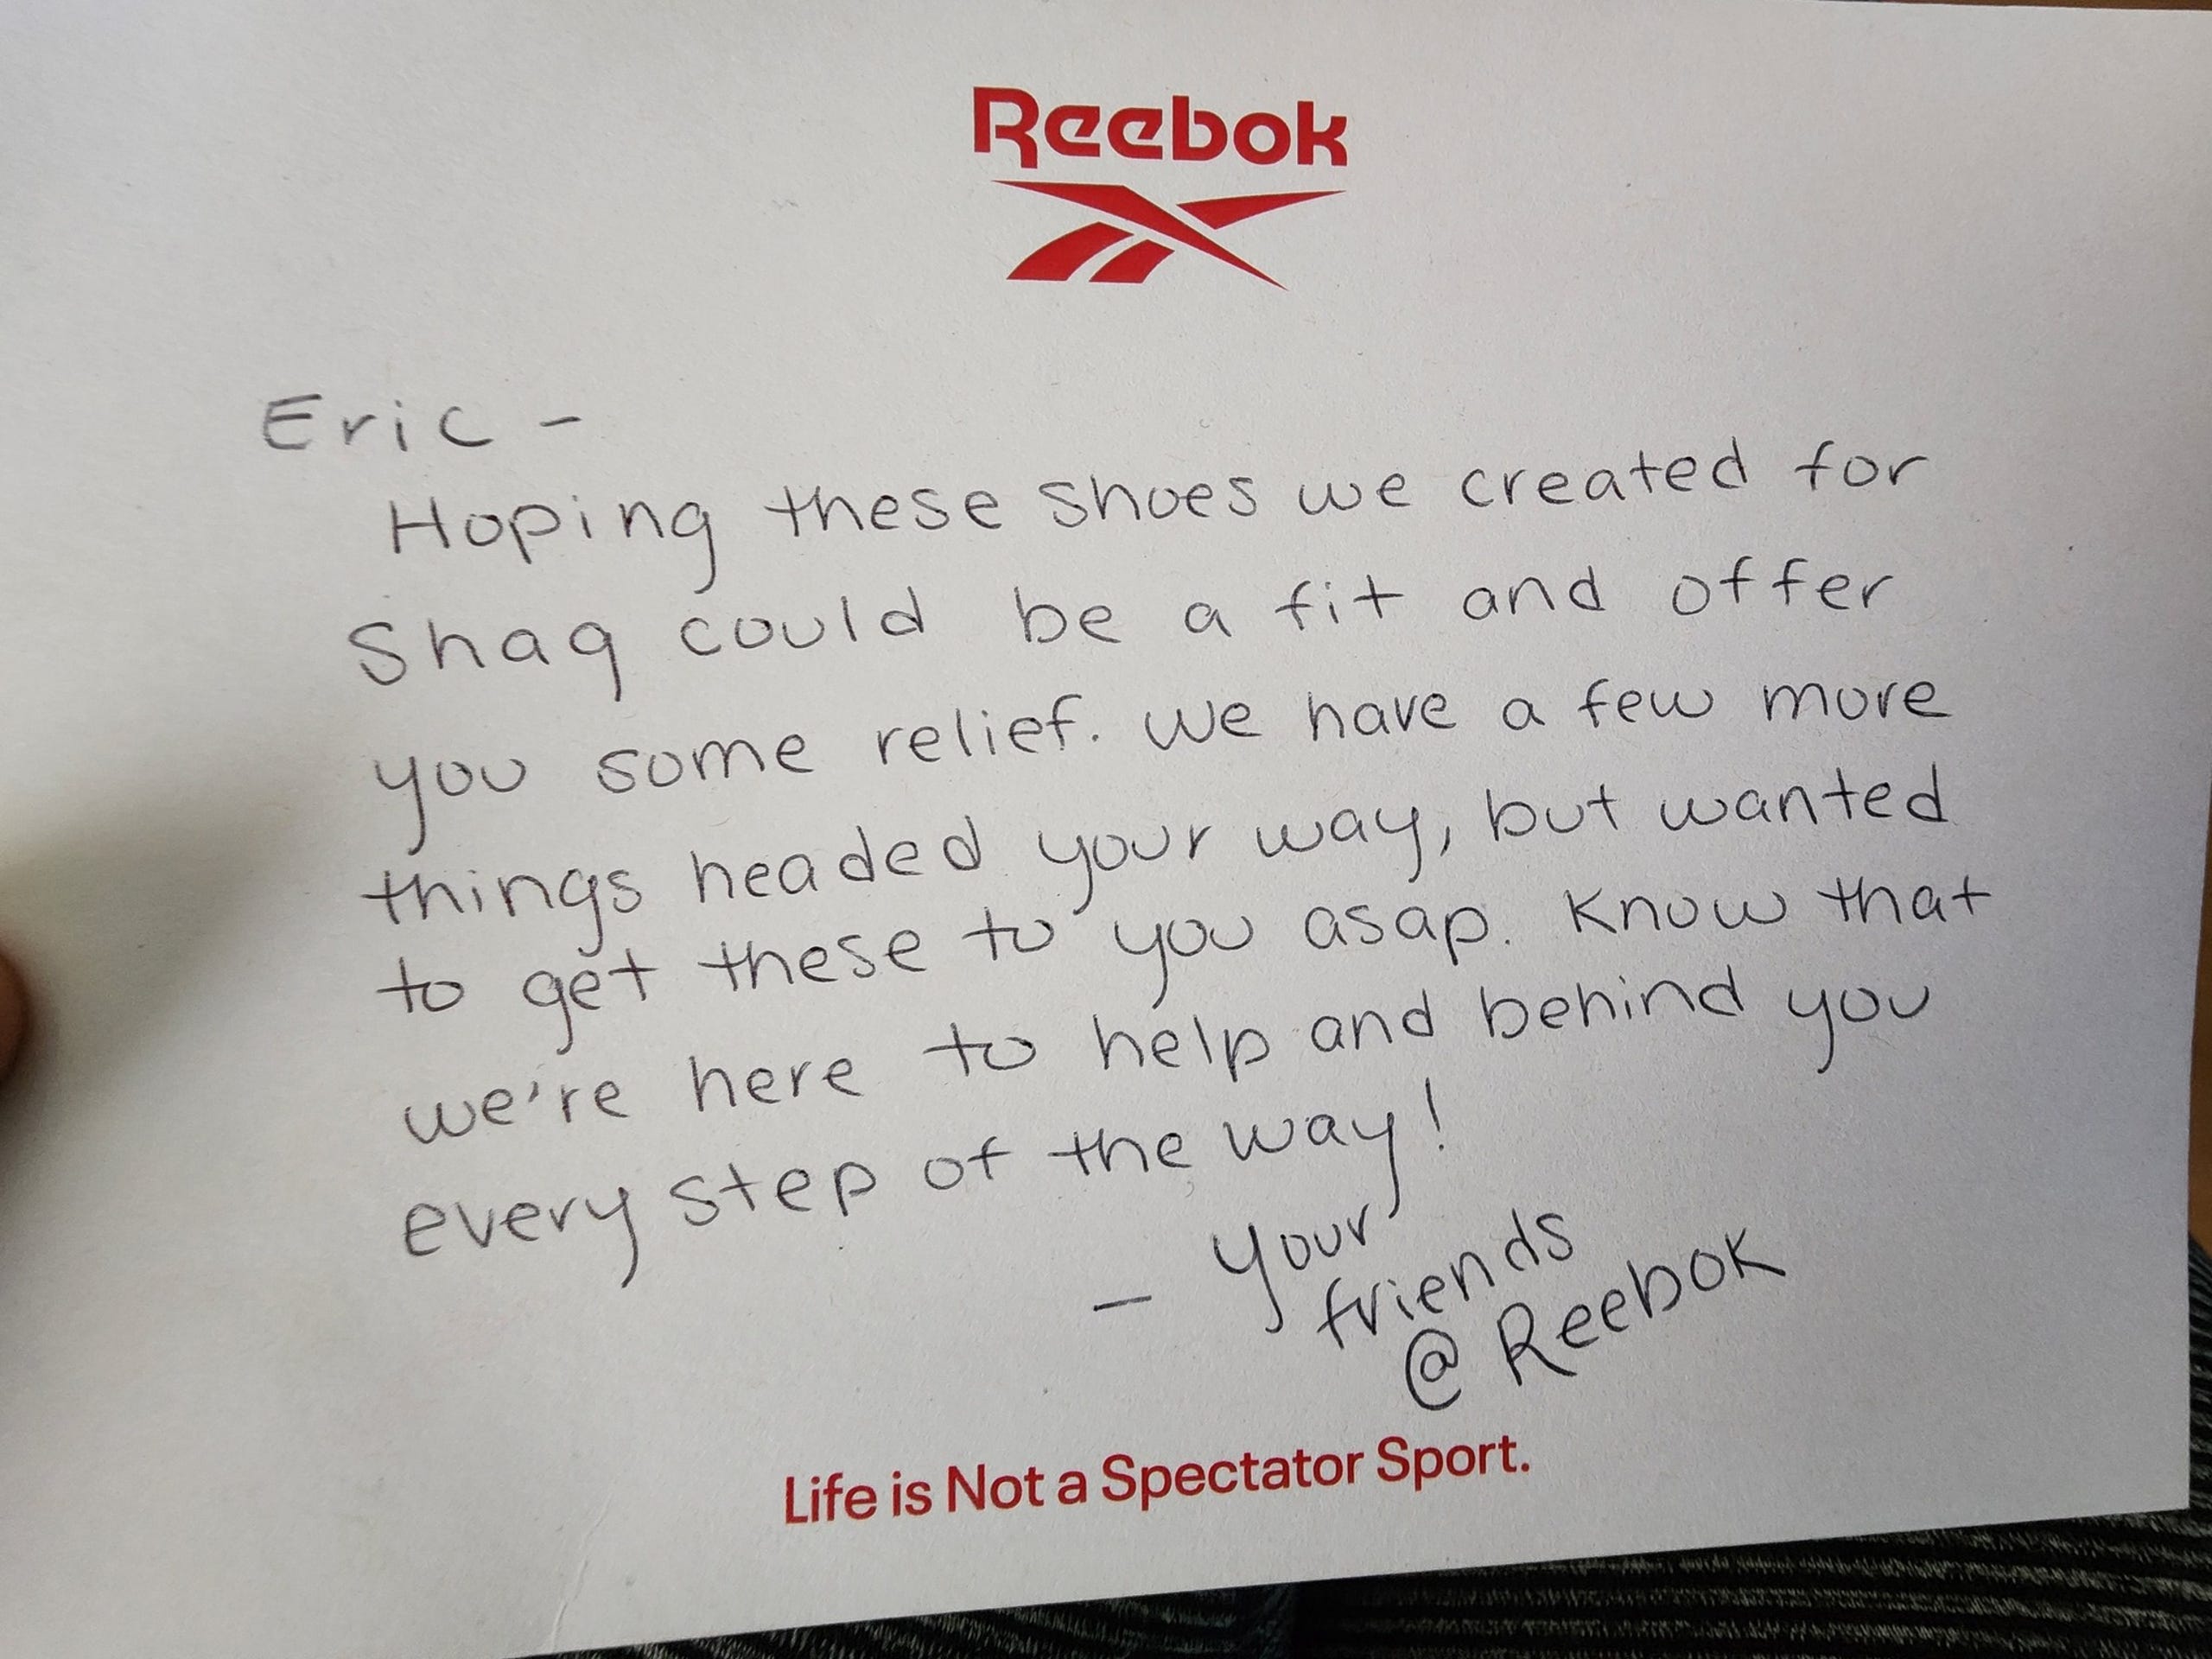 A letter to Eric Kilburn from Reebok that arrived with multiple pairs of size 22 shoes on March 30, 2023 to his home in Goodrich.